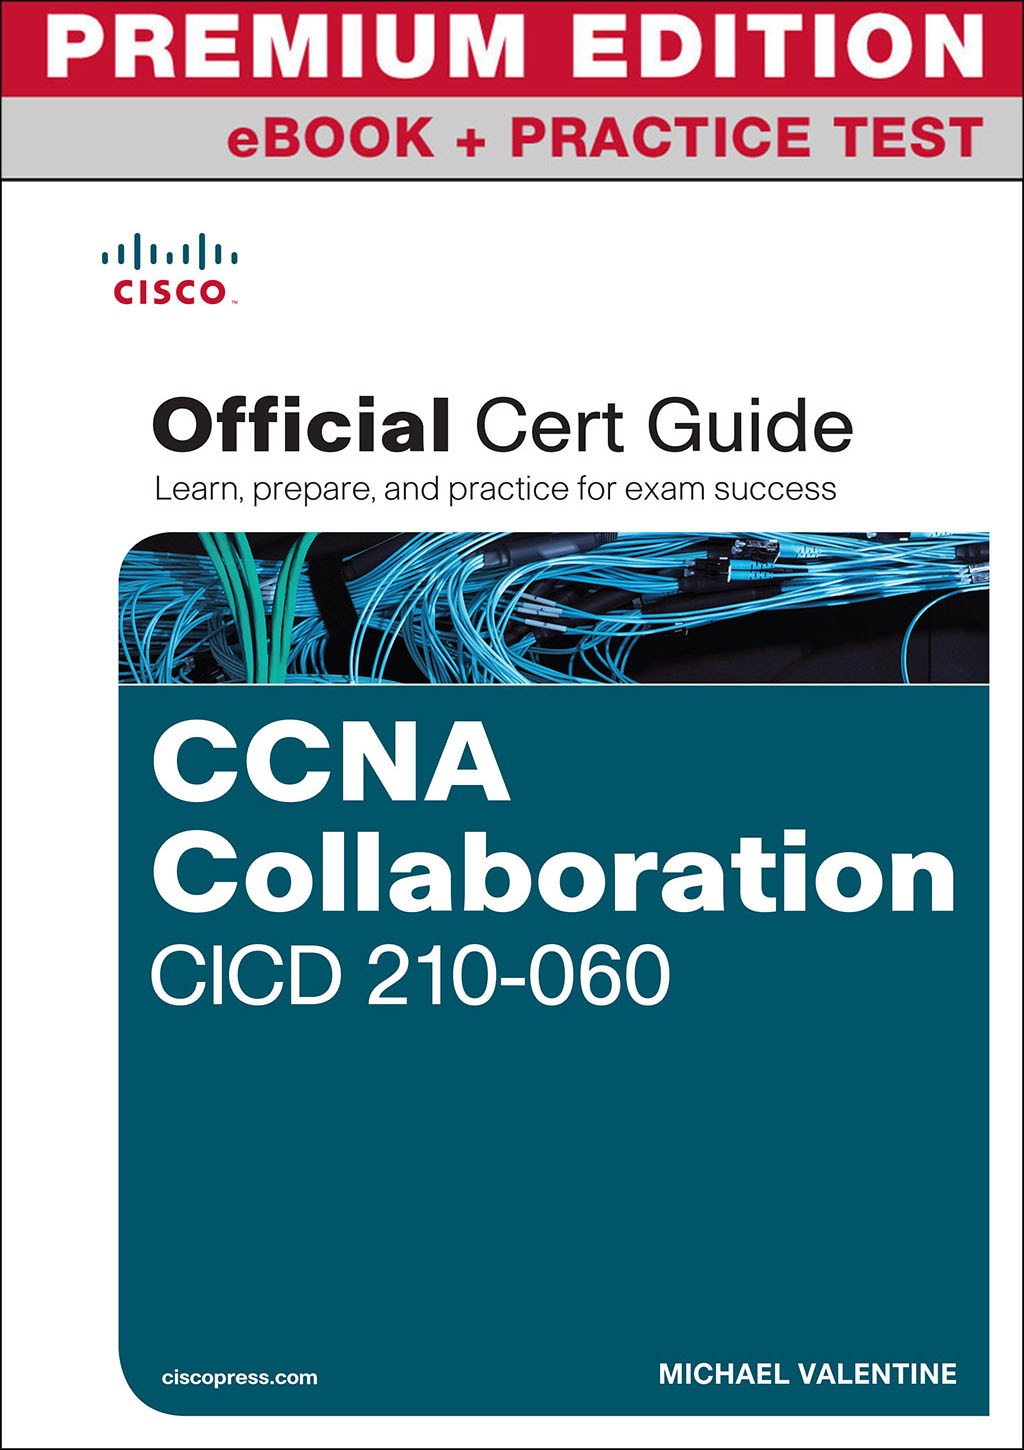 CCNA Collaboration CICD 210-060 Official Cert Guide Premium Edition and Practice Test